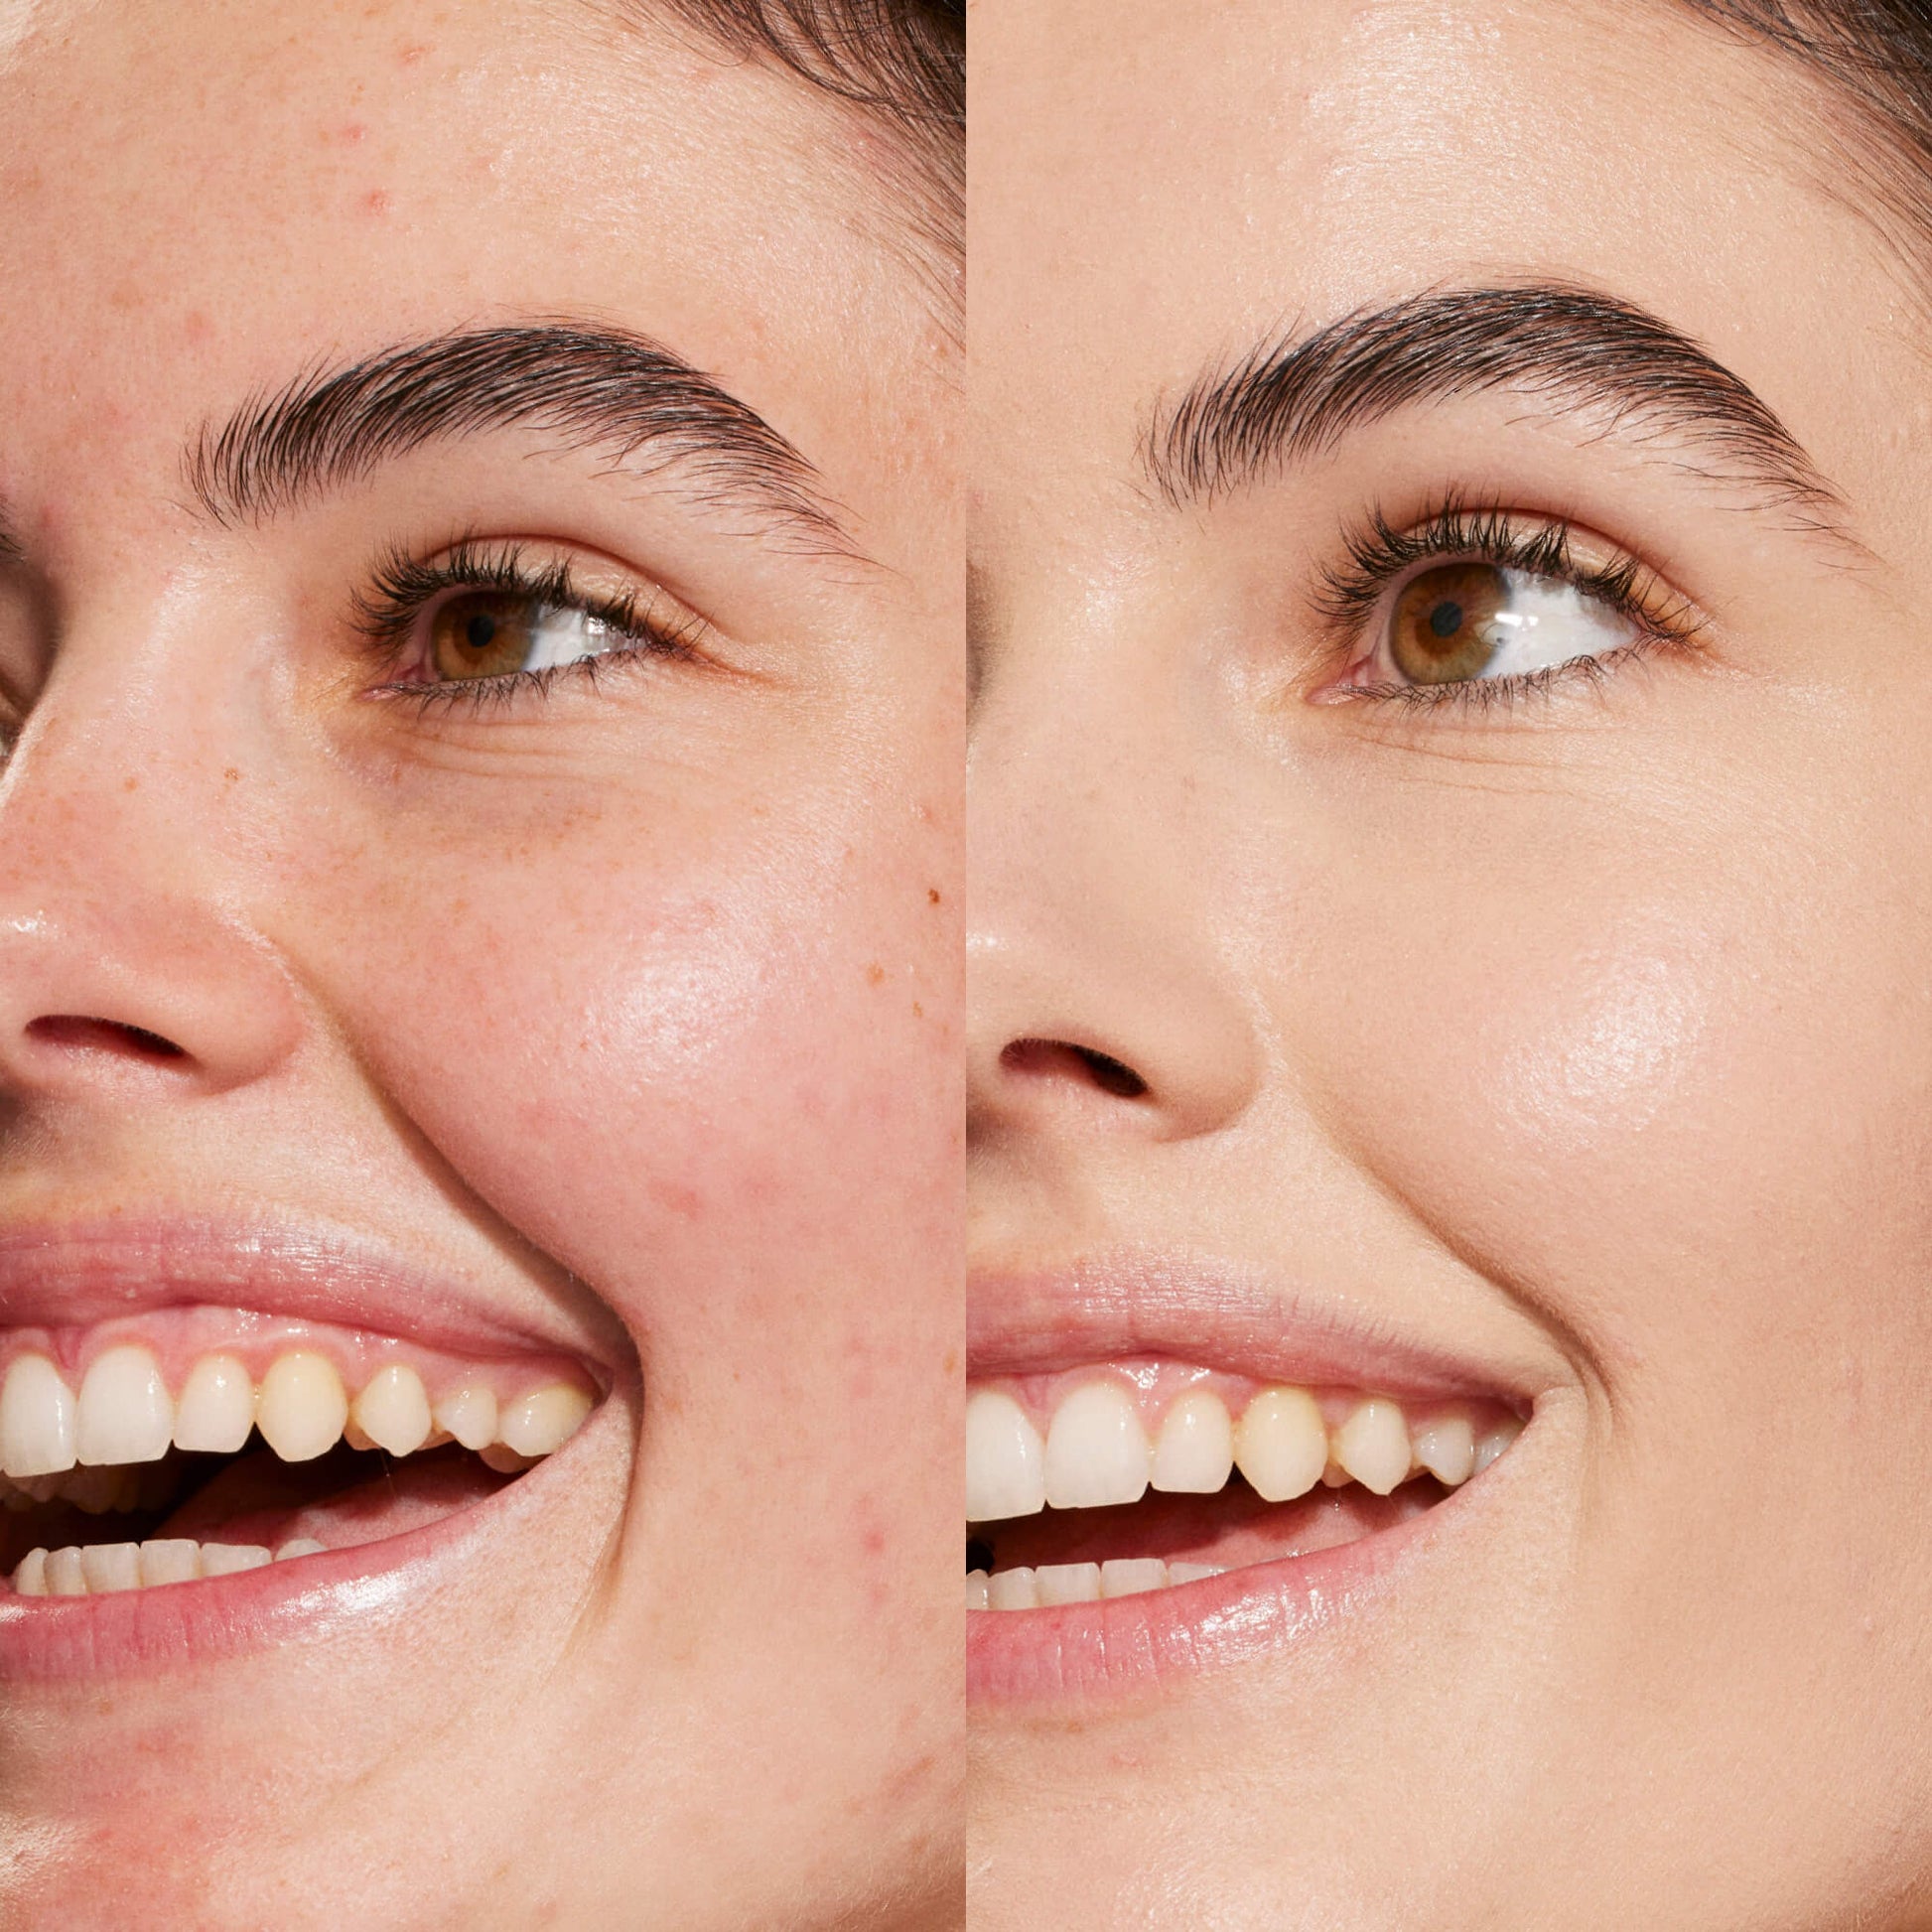 A person's face before and after using Tower 28 Beauty's Swipe Serum Concealer in shade 3.0 CC to cover up dark circles, blemishes, and discoloration